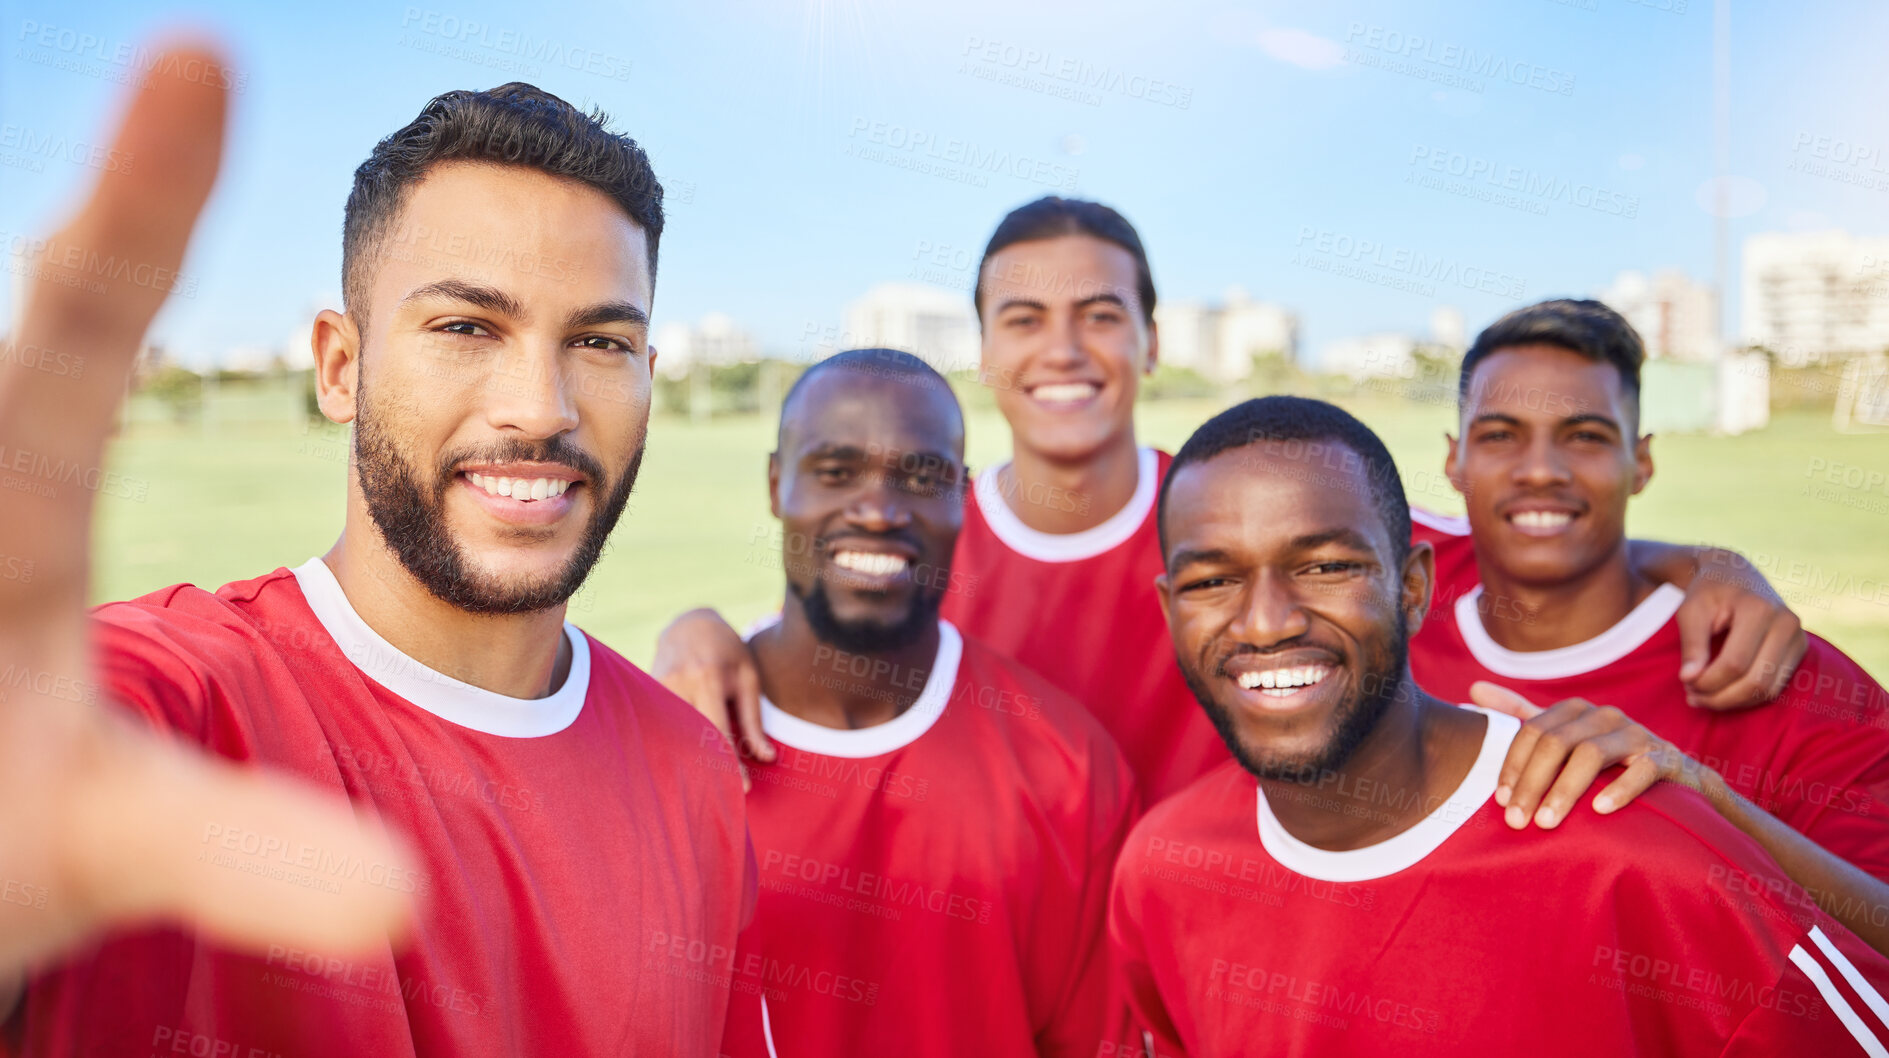 Buy stock photo Soccer team, happy and football player selfie portrait with group diversity men together for motivation, winning and competition game. Exercise, champion mindset and smile photo of guys at training